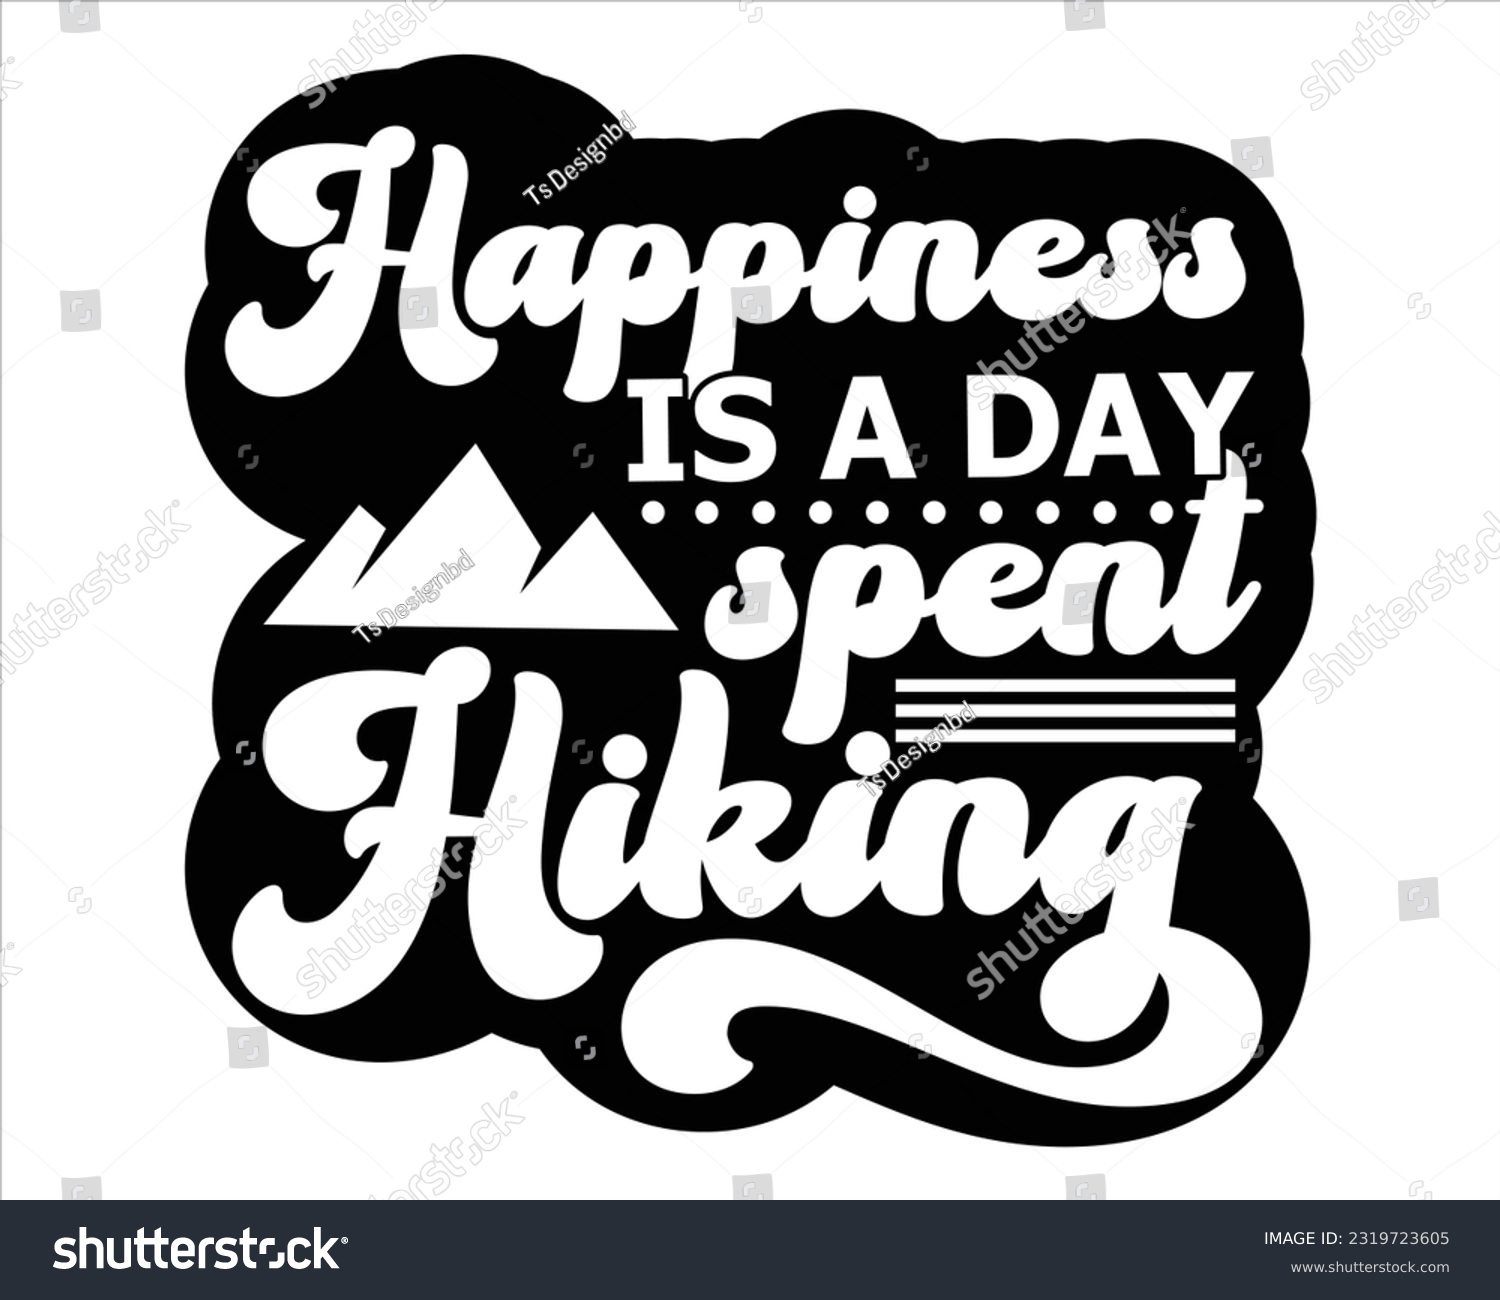 SVG of Happiness Is a Day Spend Hiking Svg Design, Hiking Svg Design, Mountain illustration, outdoor adventure ,Outdoor Adventure Inspiring Motivation Quote, camping, hiking svg